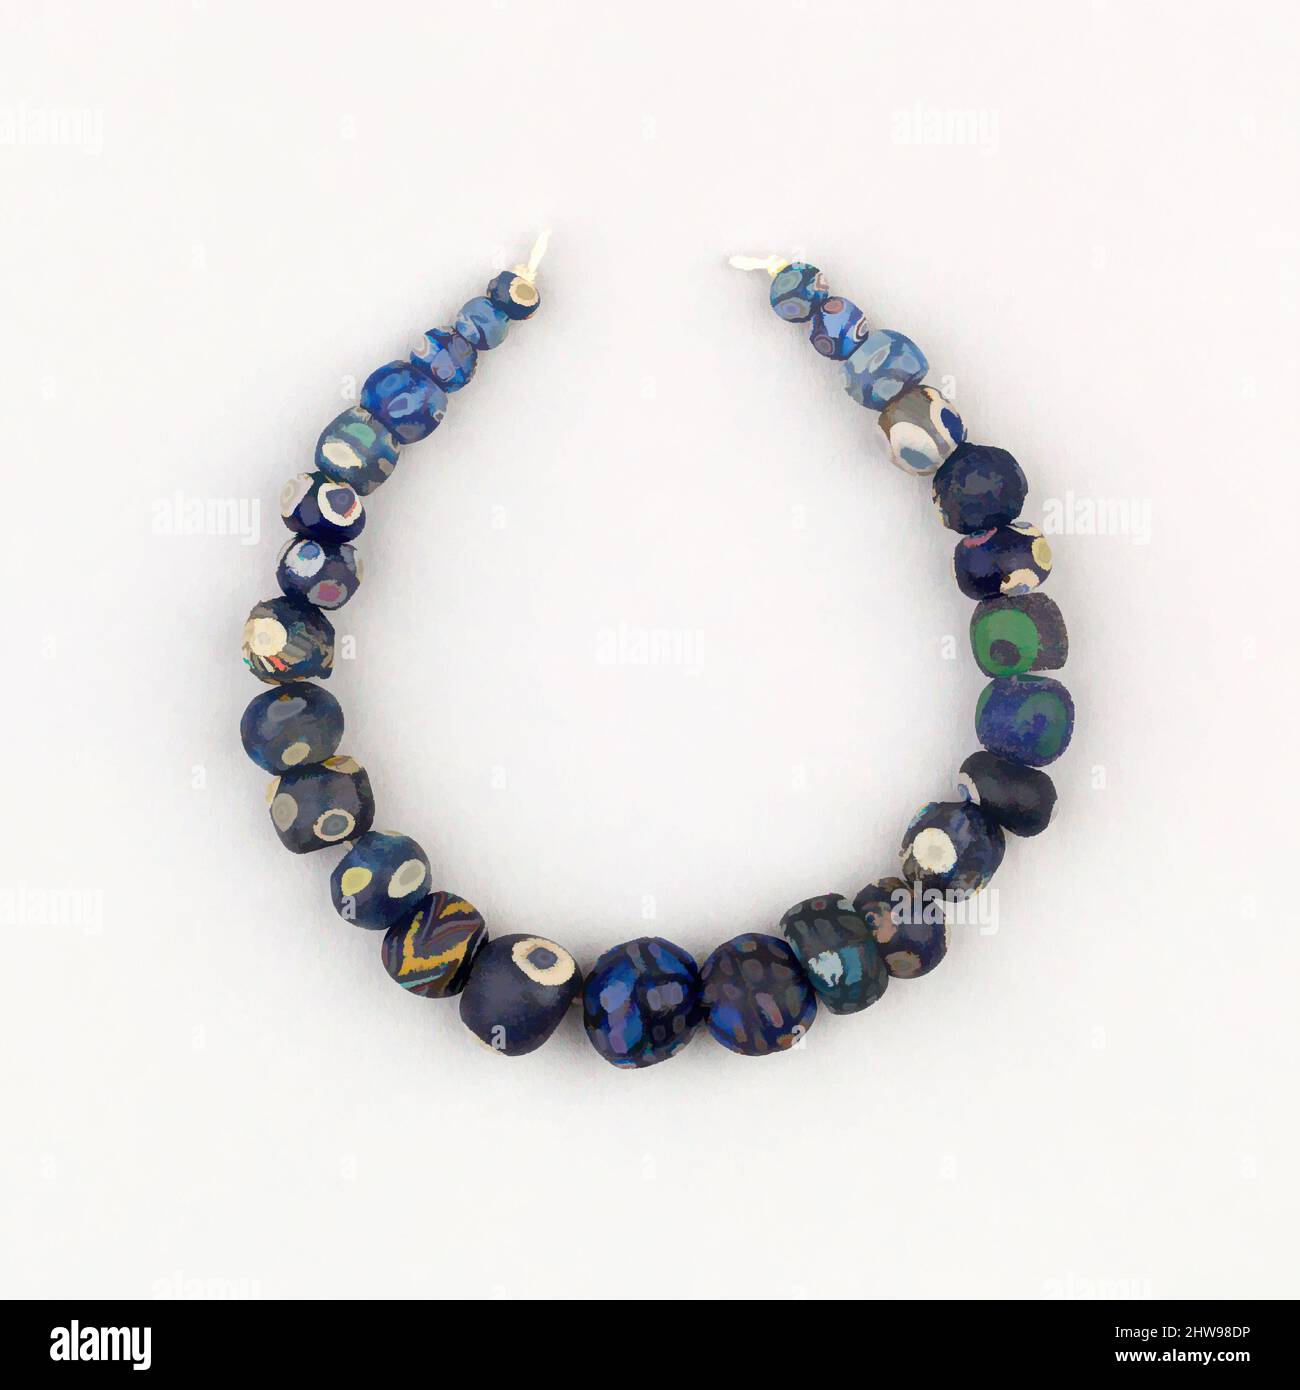 Unique Beads Roman Mosaic Glass And Agate Stone Beads Beautiful Necklace